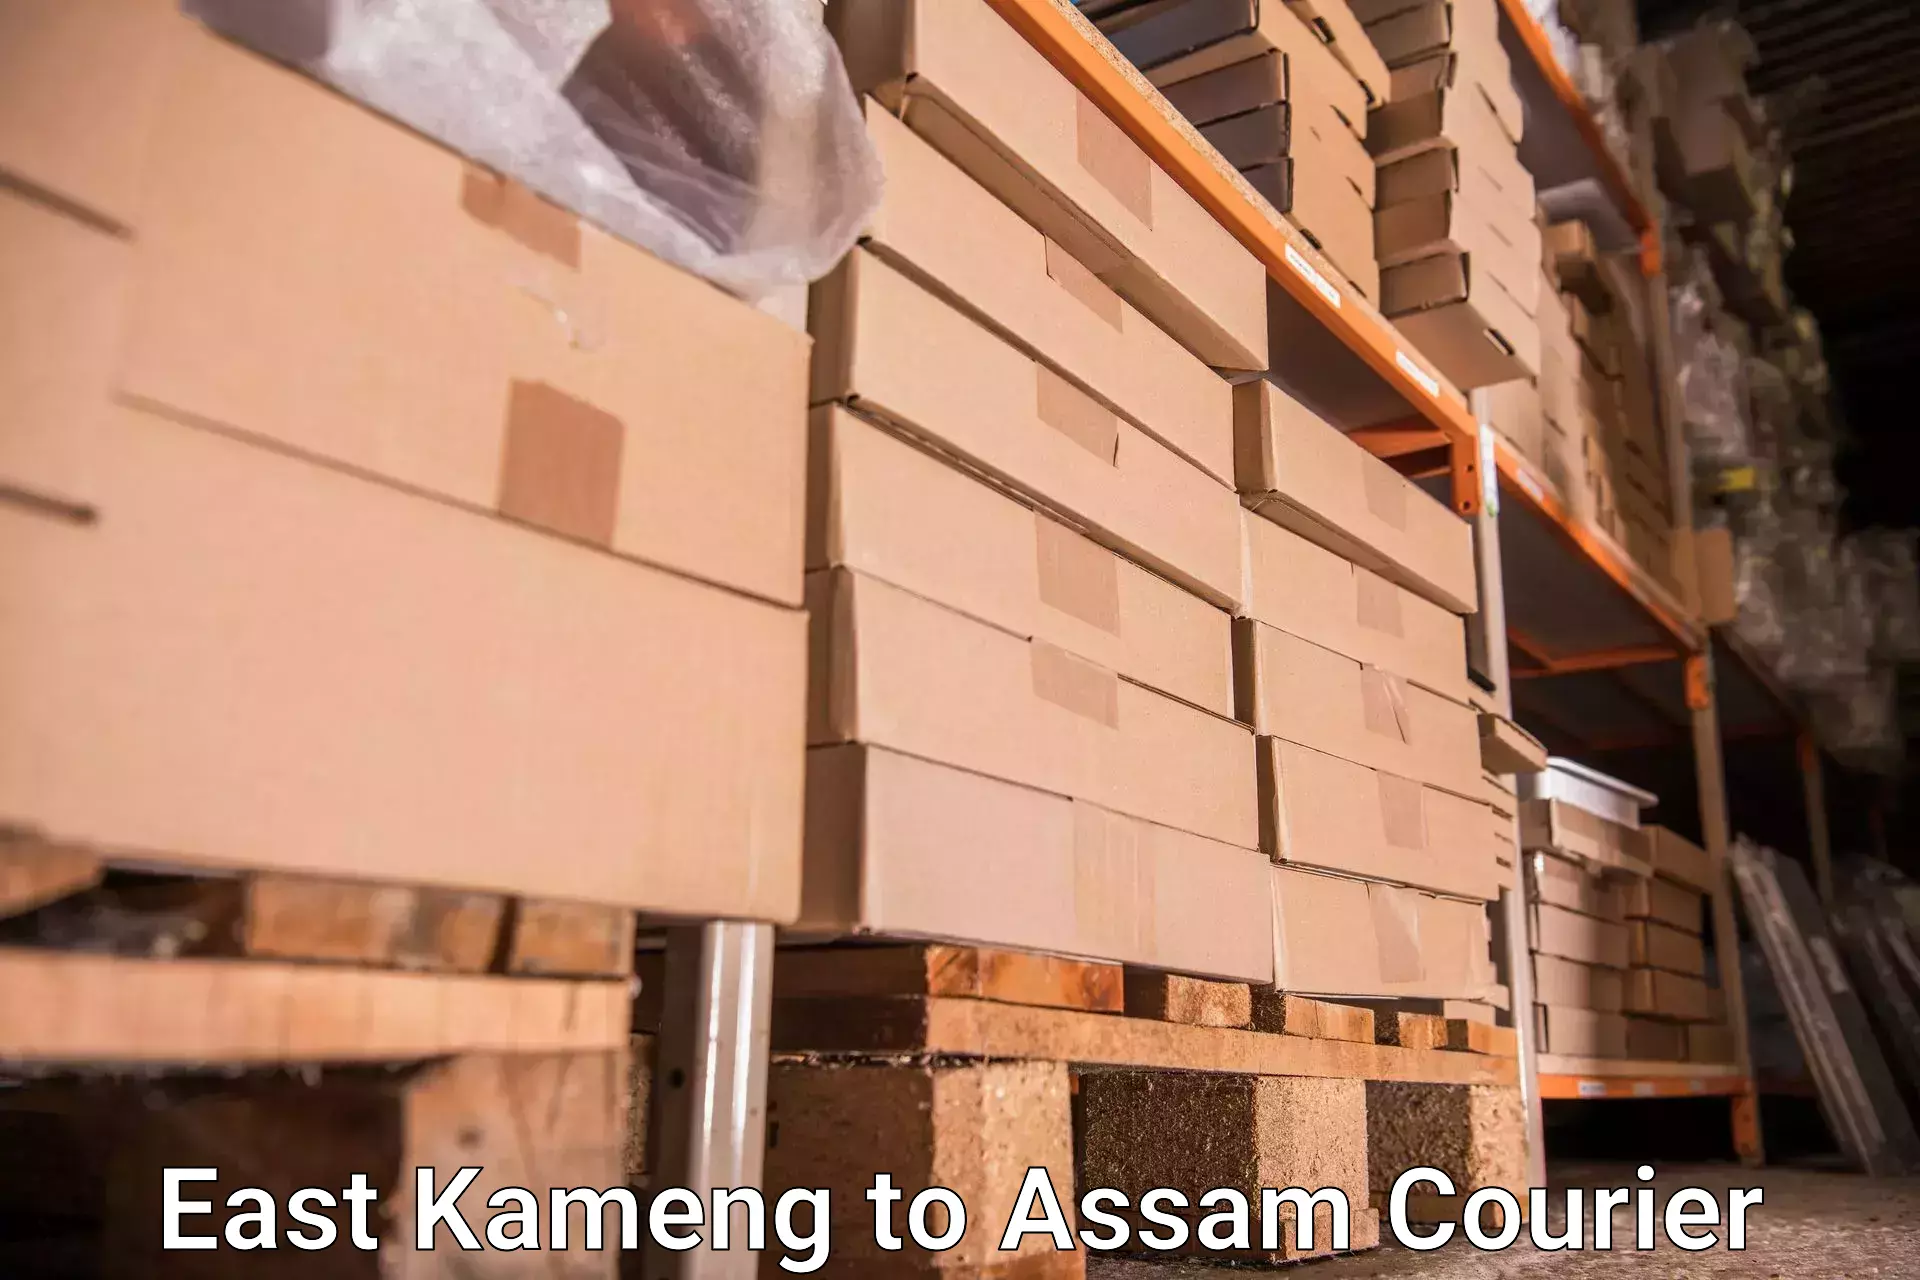 Holiday season luggage delivery East Kameng to Assam